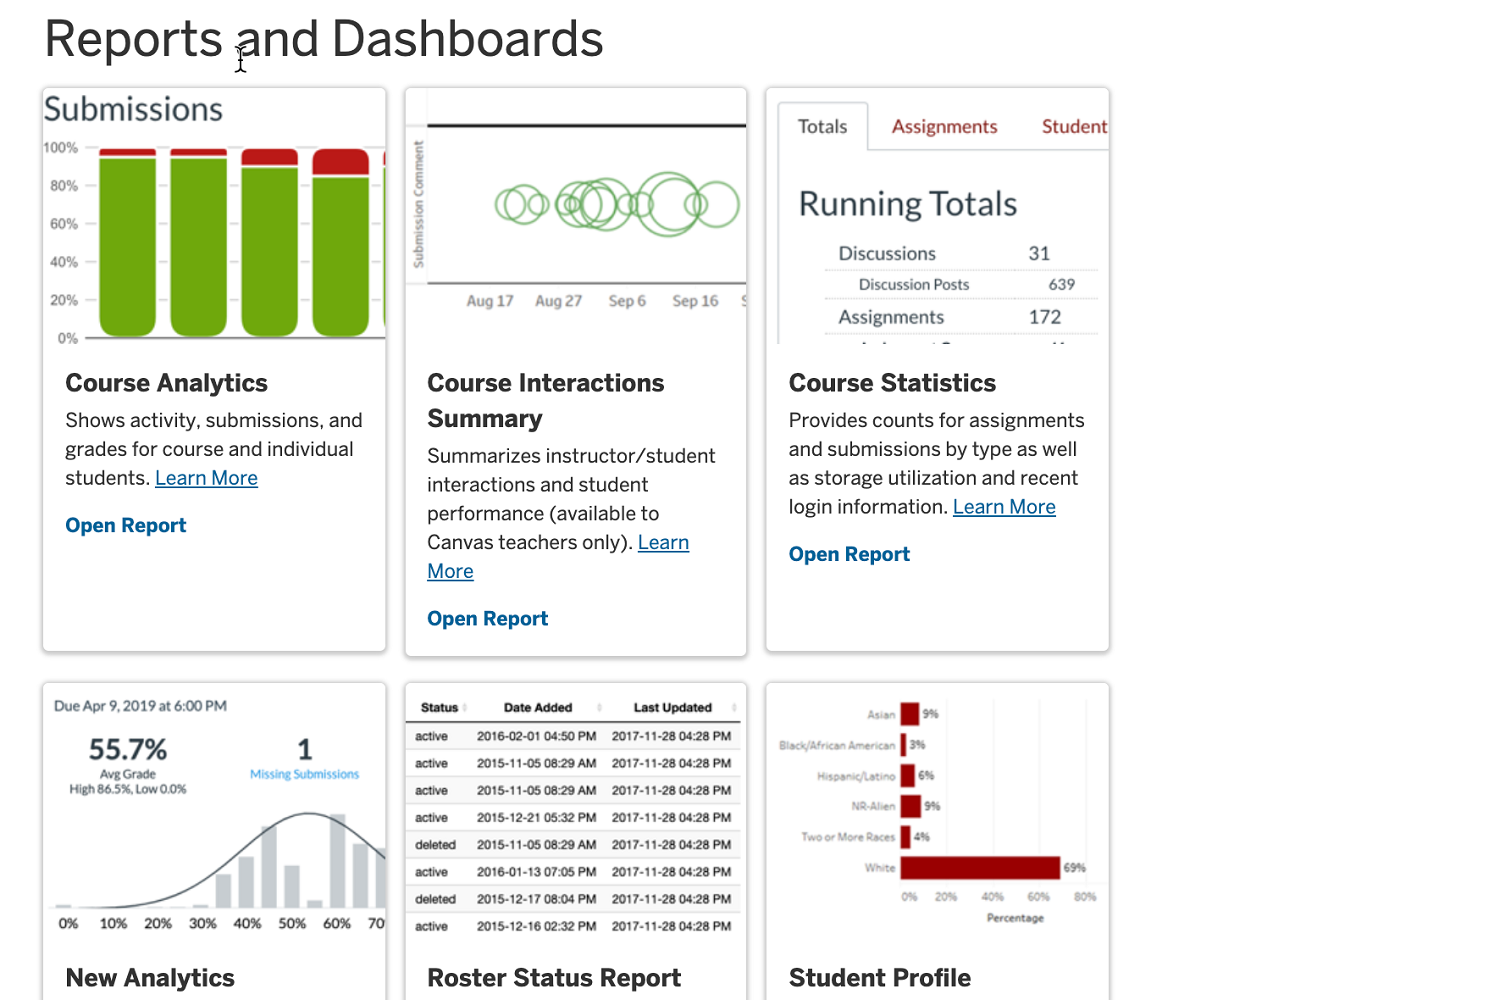 Image of the main screen of the Reports and Dashboards tool.